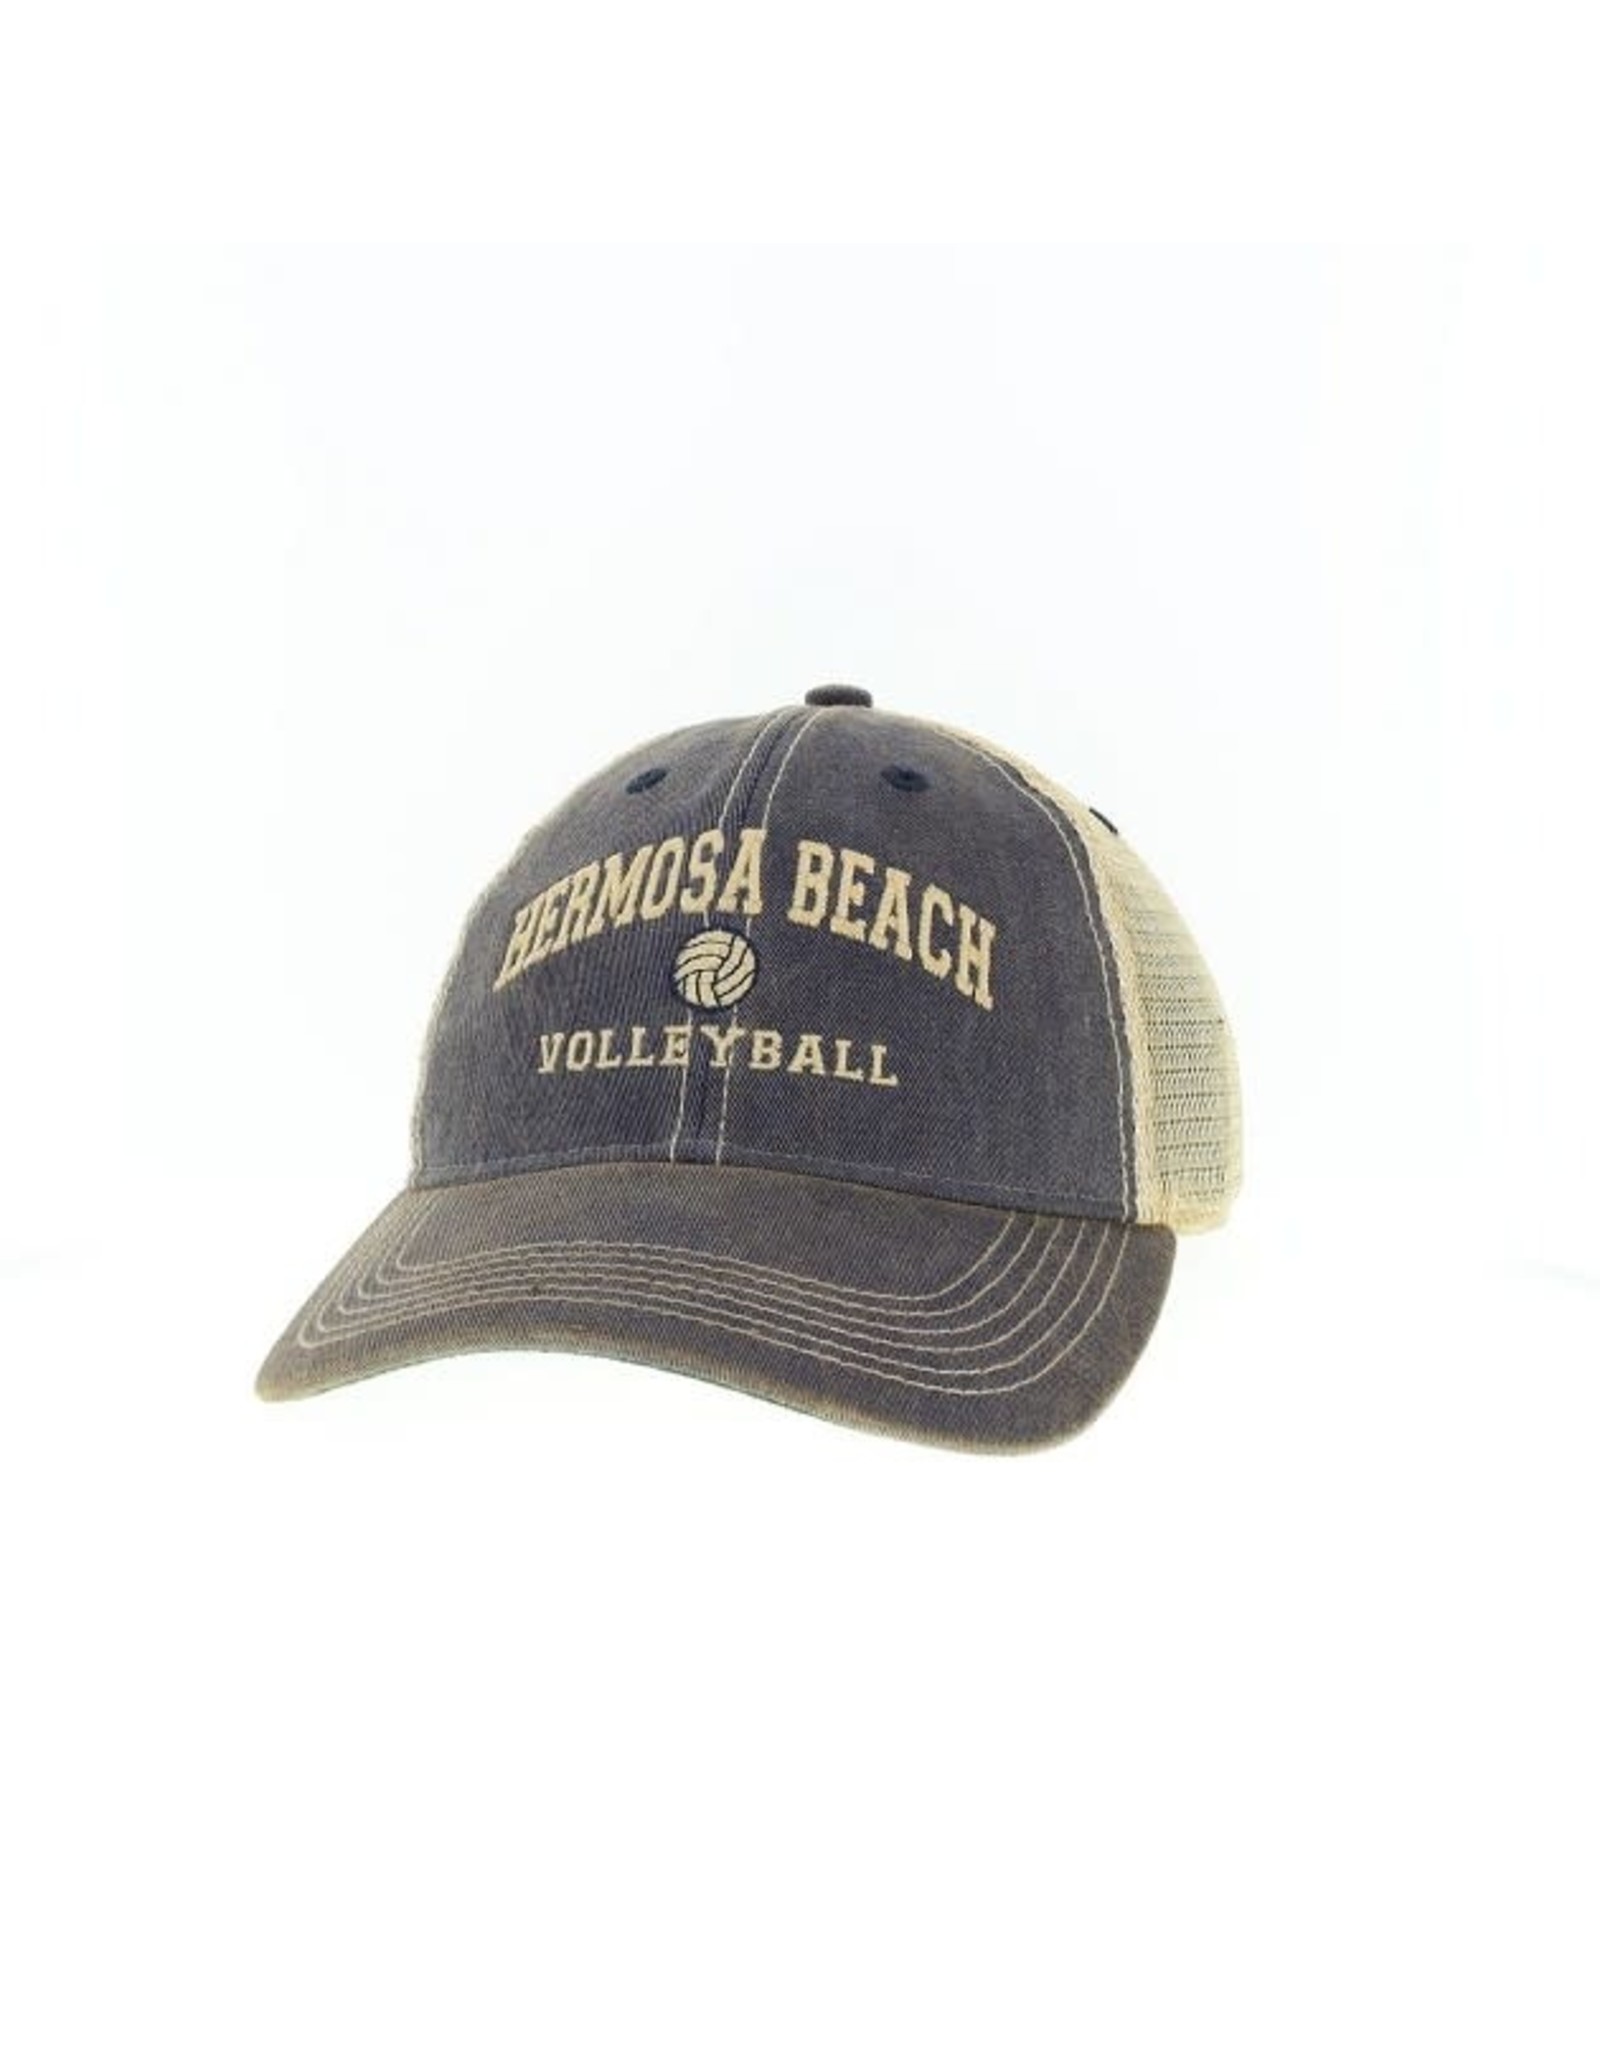 L2 LEAGUE LEGACY #1414549 LGCY HB VOLLEYBALL HAT NAVY